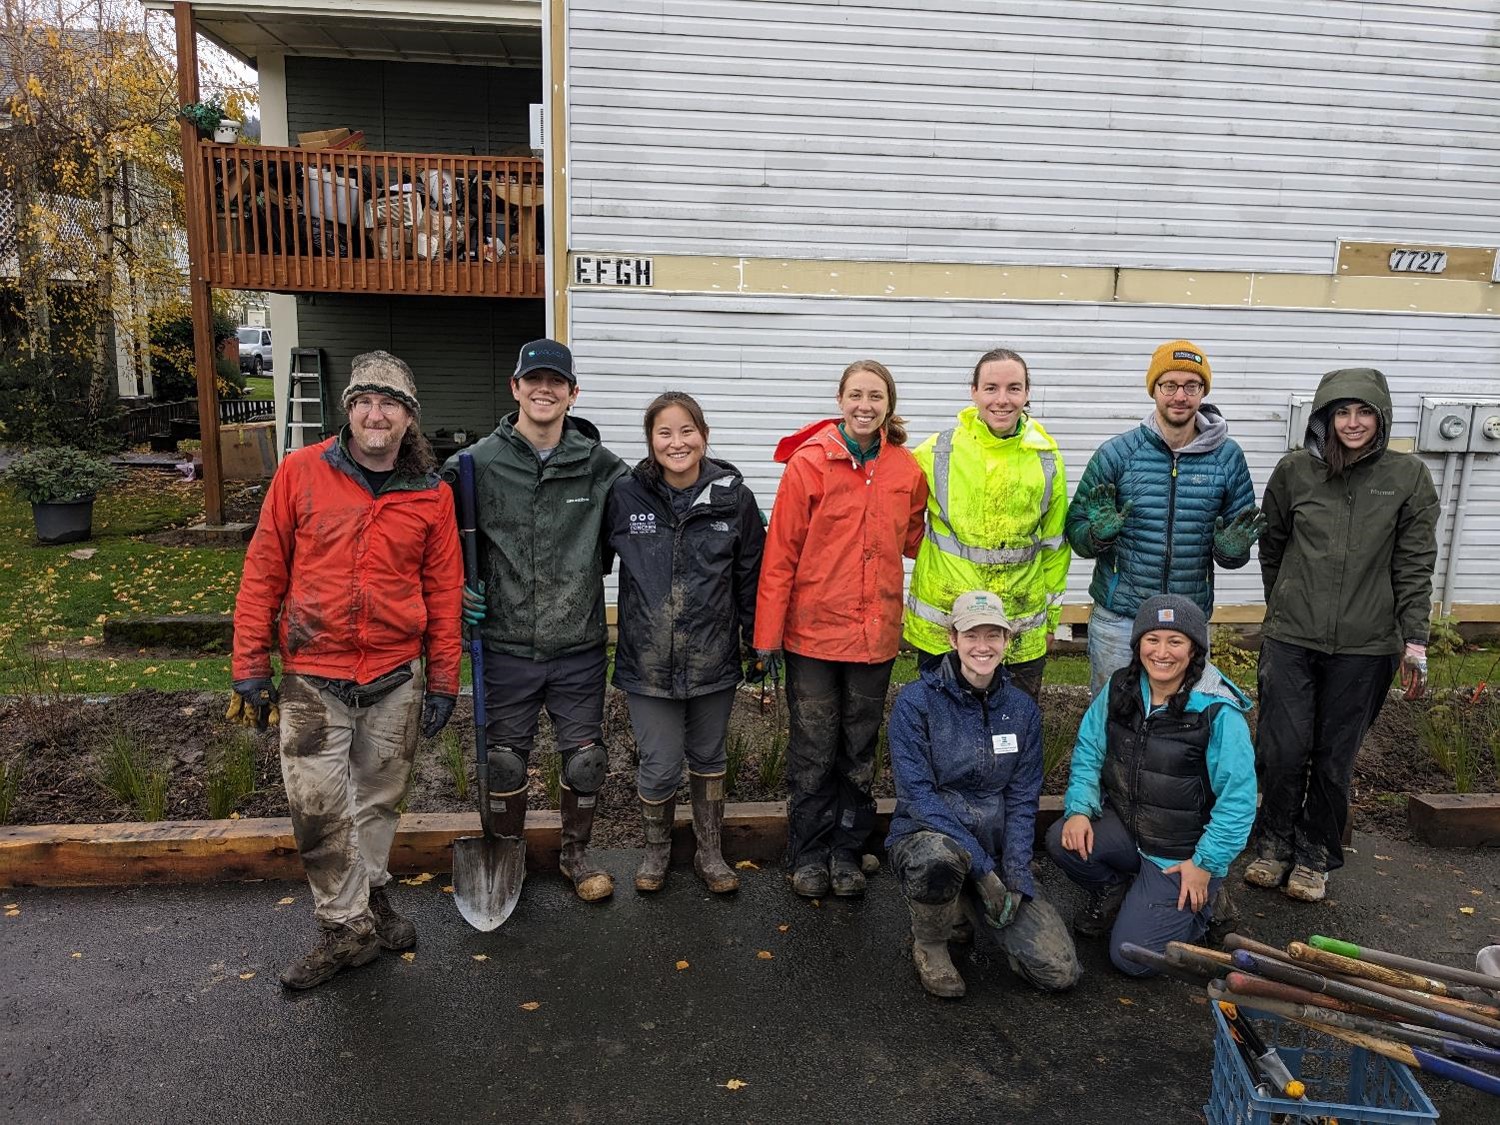 Volunteers - muddy & happy - smiling for the camera after planting native plants all day in the rain.